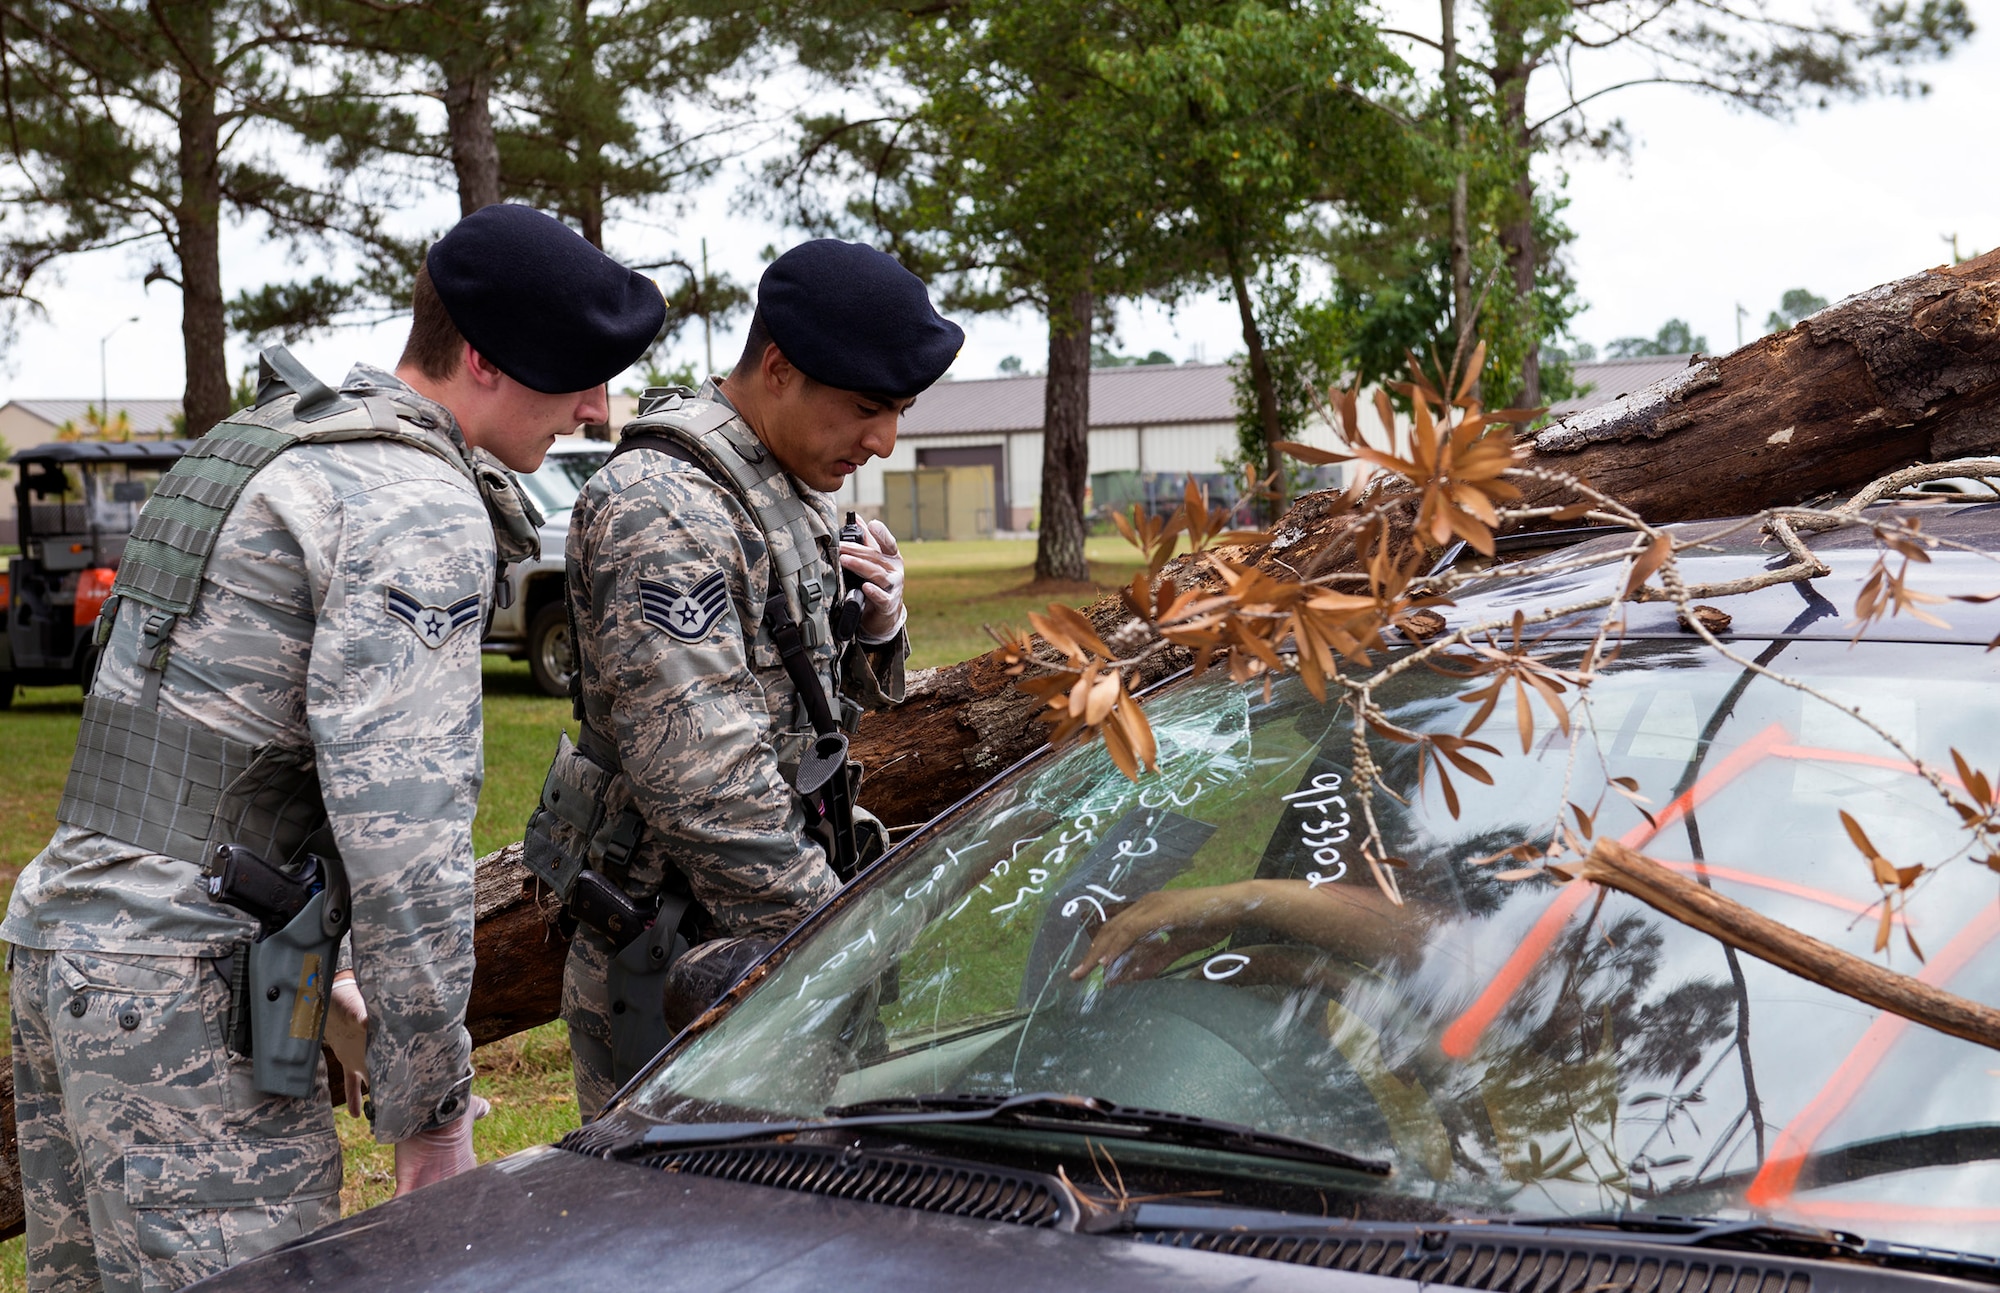 U.S. Air Force Airman 1st Class Taylor Cyr, left, and Staff Sgt. Issac Rhee, patrolmen from the 23d Security Forces Squadron, simulate relaying an injured victim’s health assessment to the 23d SFS Base Defense Operations Center during a hurricane exercise, May 17, 2016, at Moody Air Force Base, Ga. After reporting the health status, medical specialists and fire emergency technicians responded to the scene. (U.S. Air Force photo by Airman 1st Class Greg Nash/Released)
